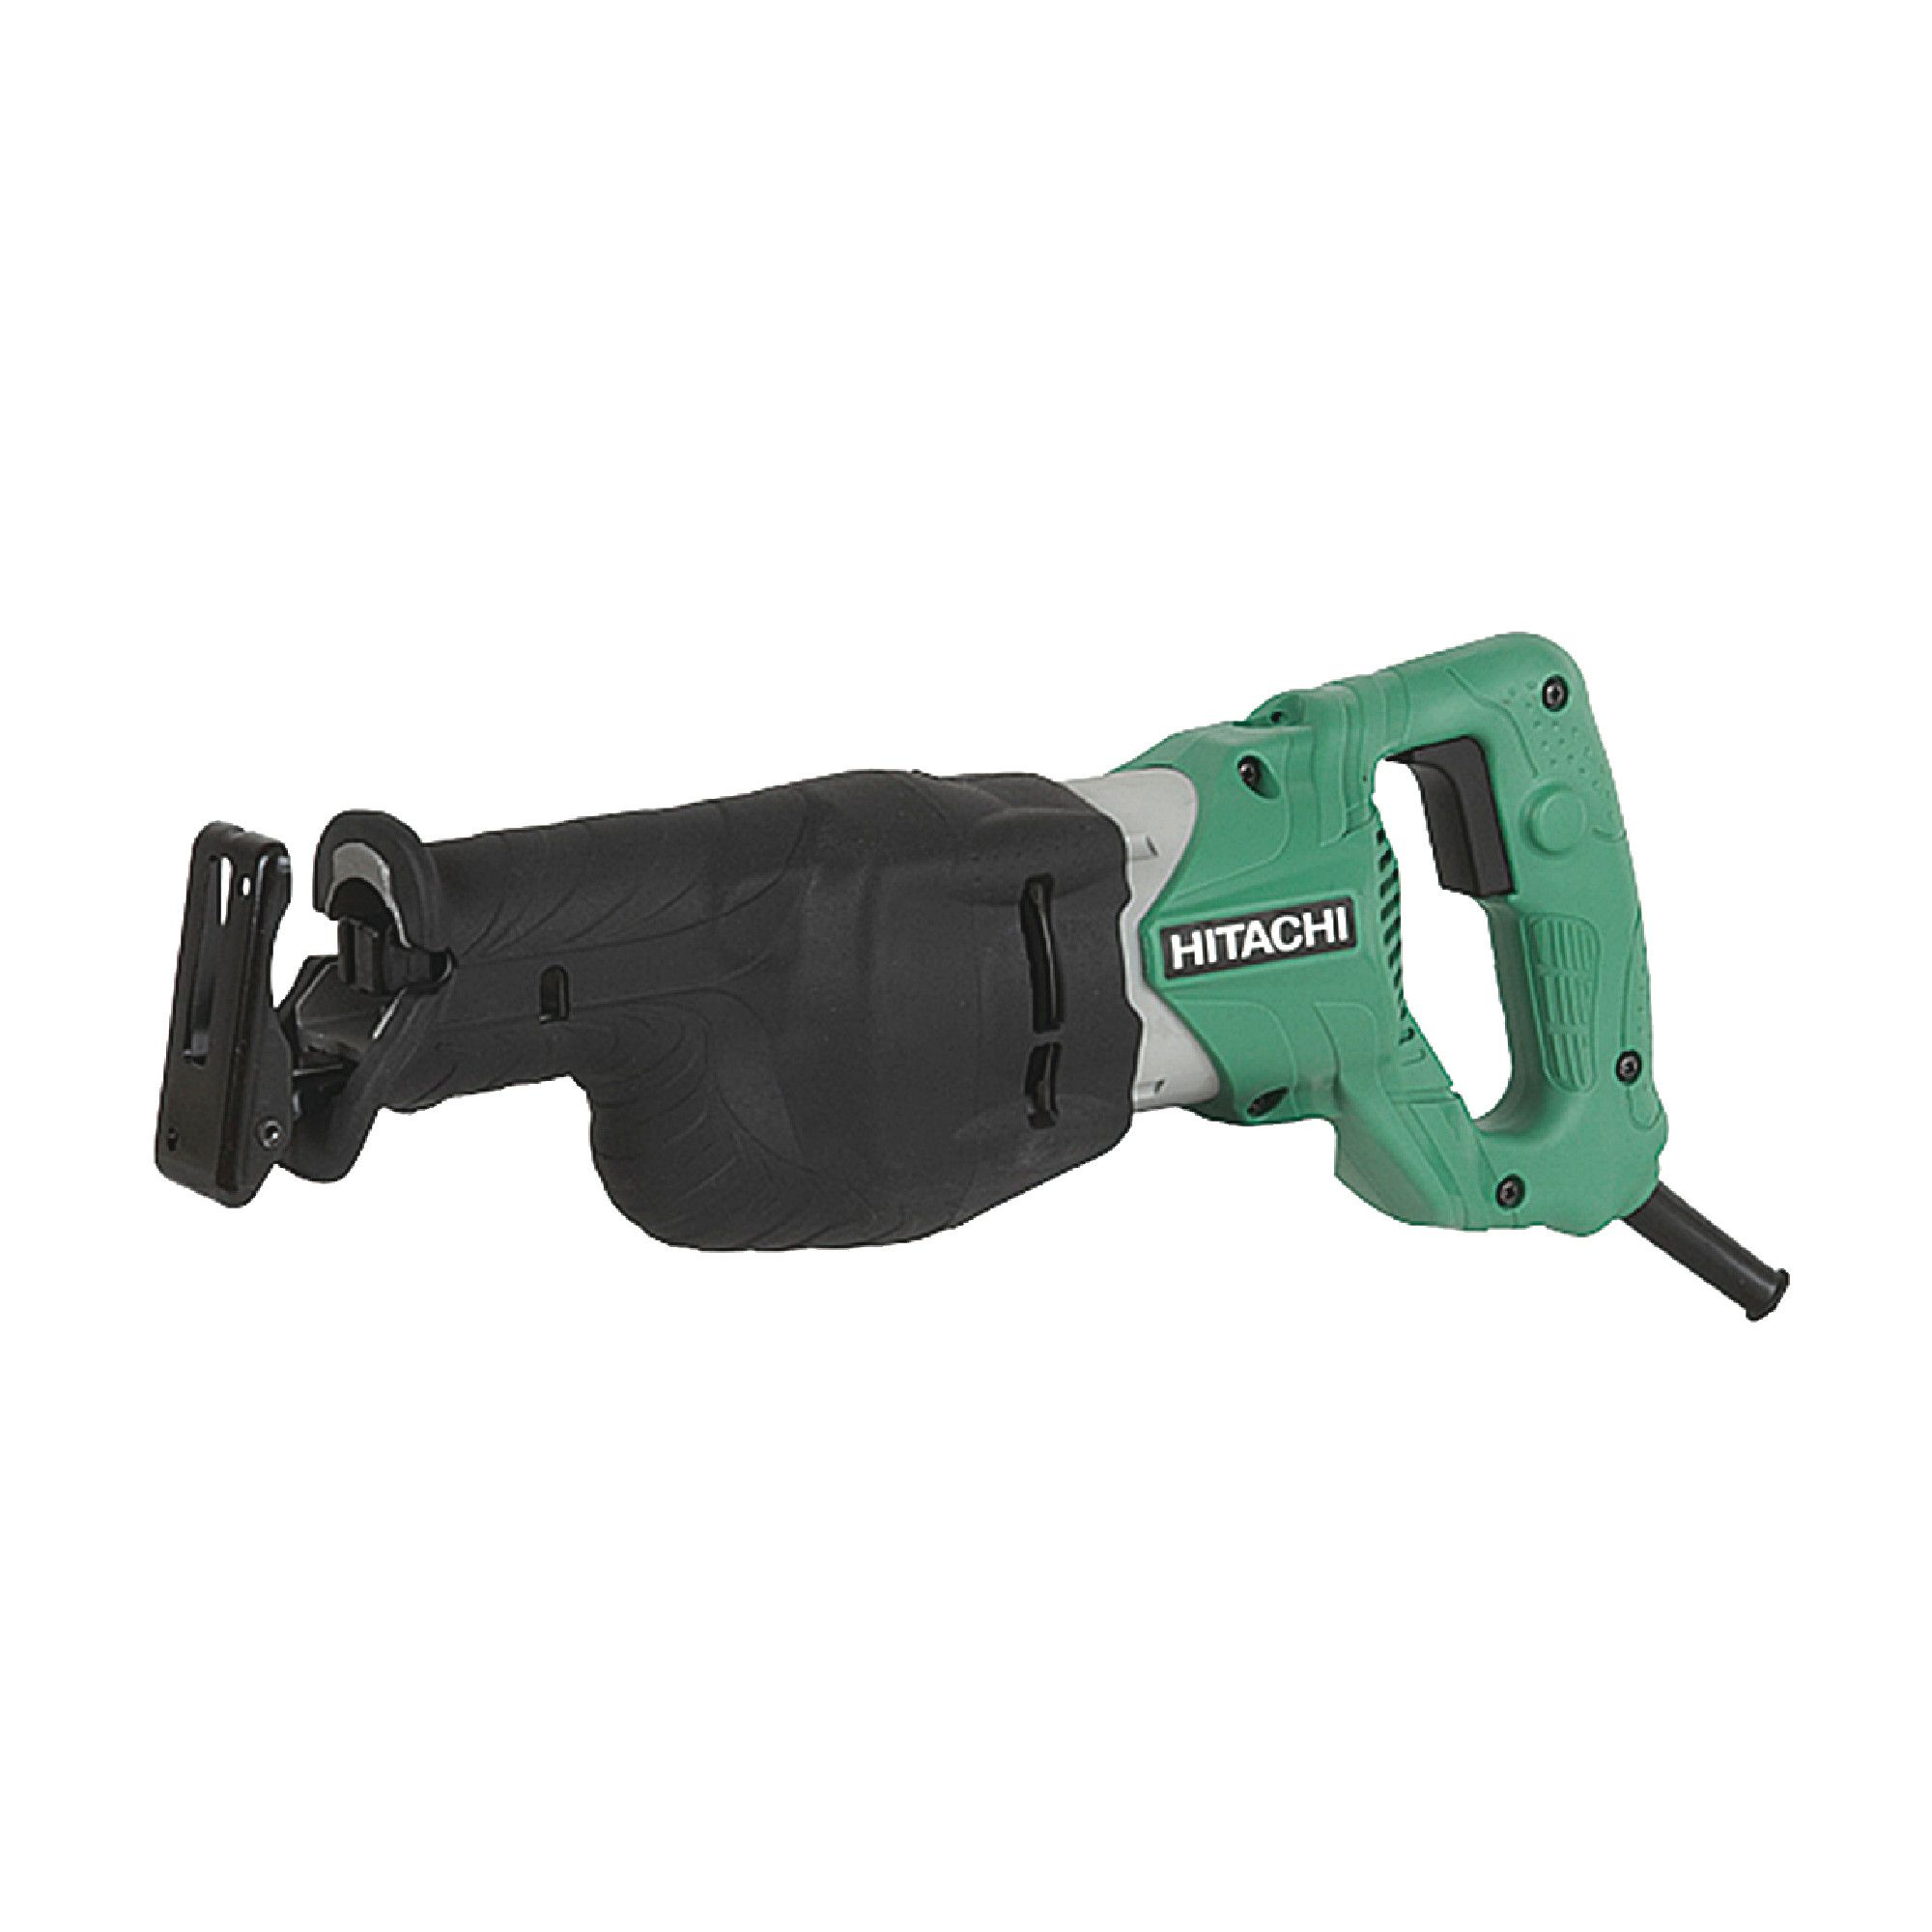 18 Volt 10.0 Amp Corded Reciprocating Saw With Case